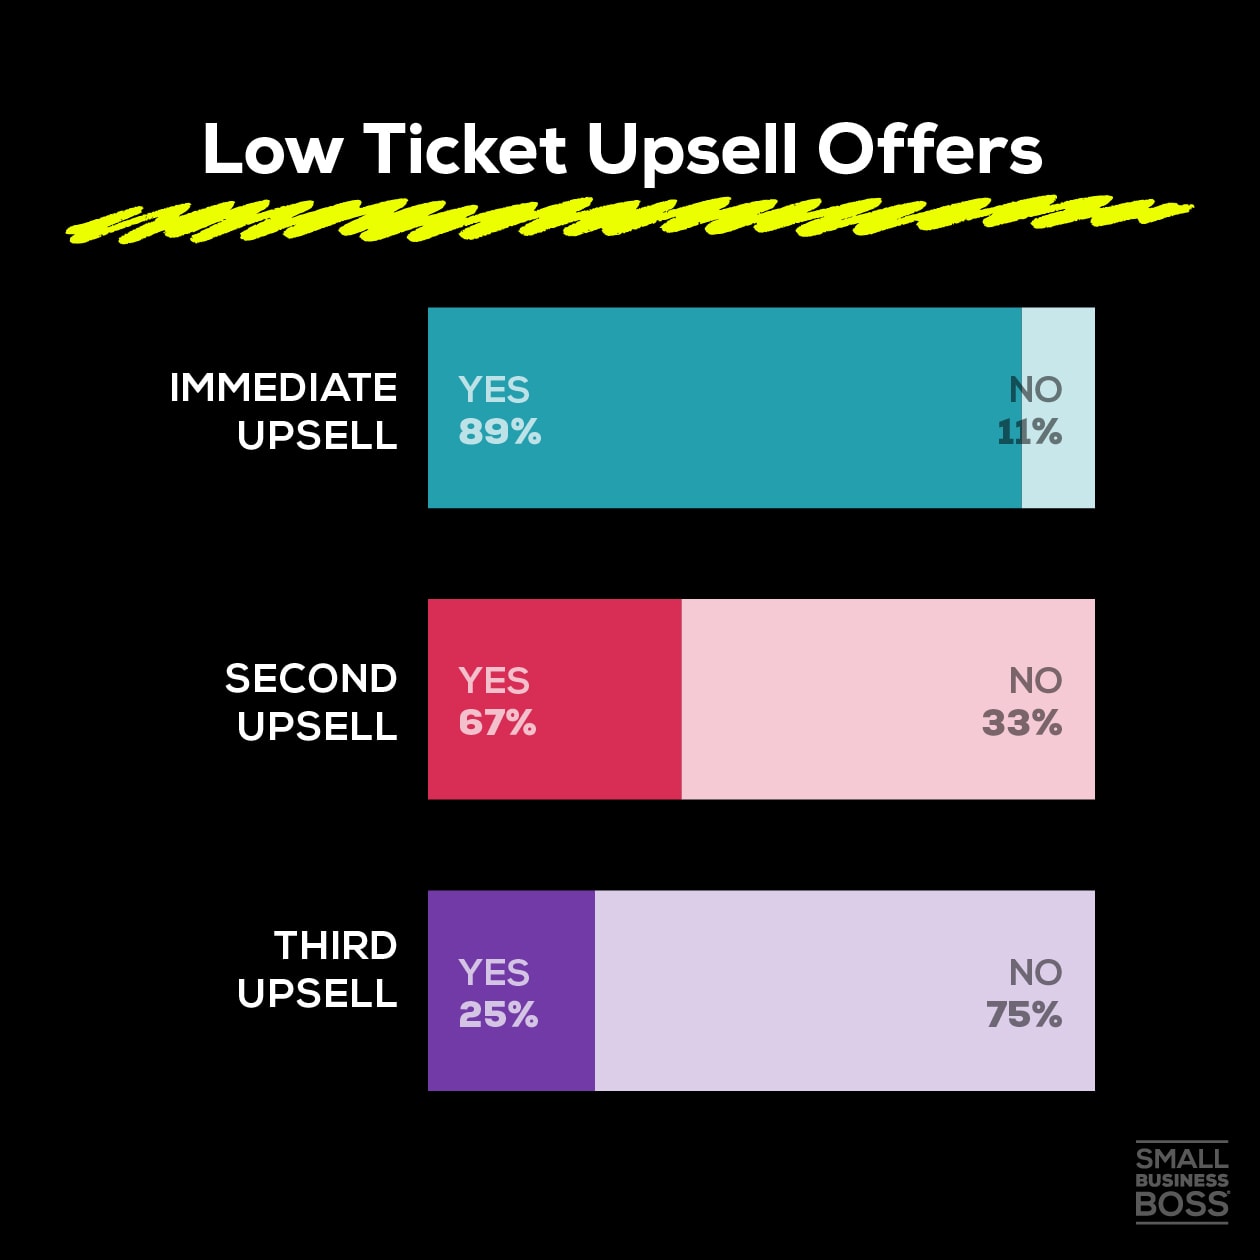 Low Ticket Upsell Offers